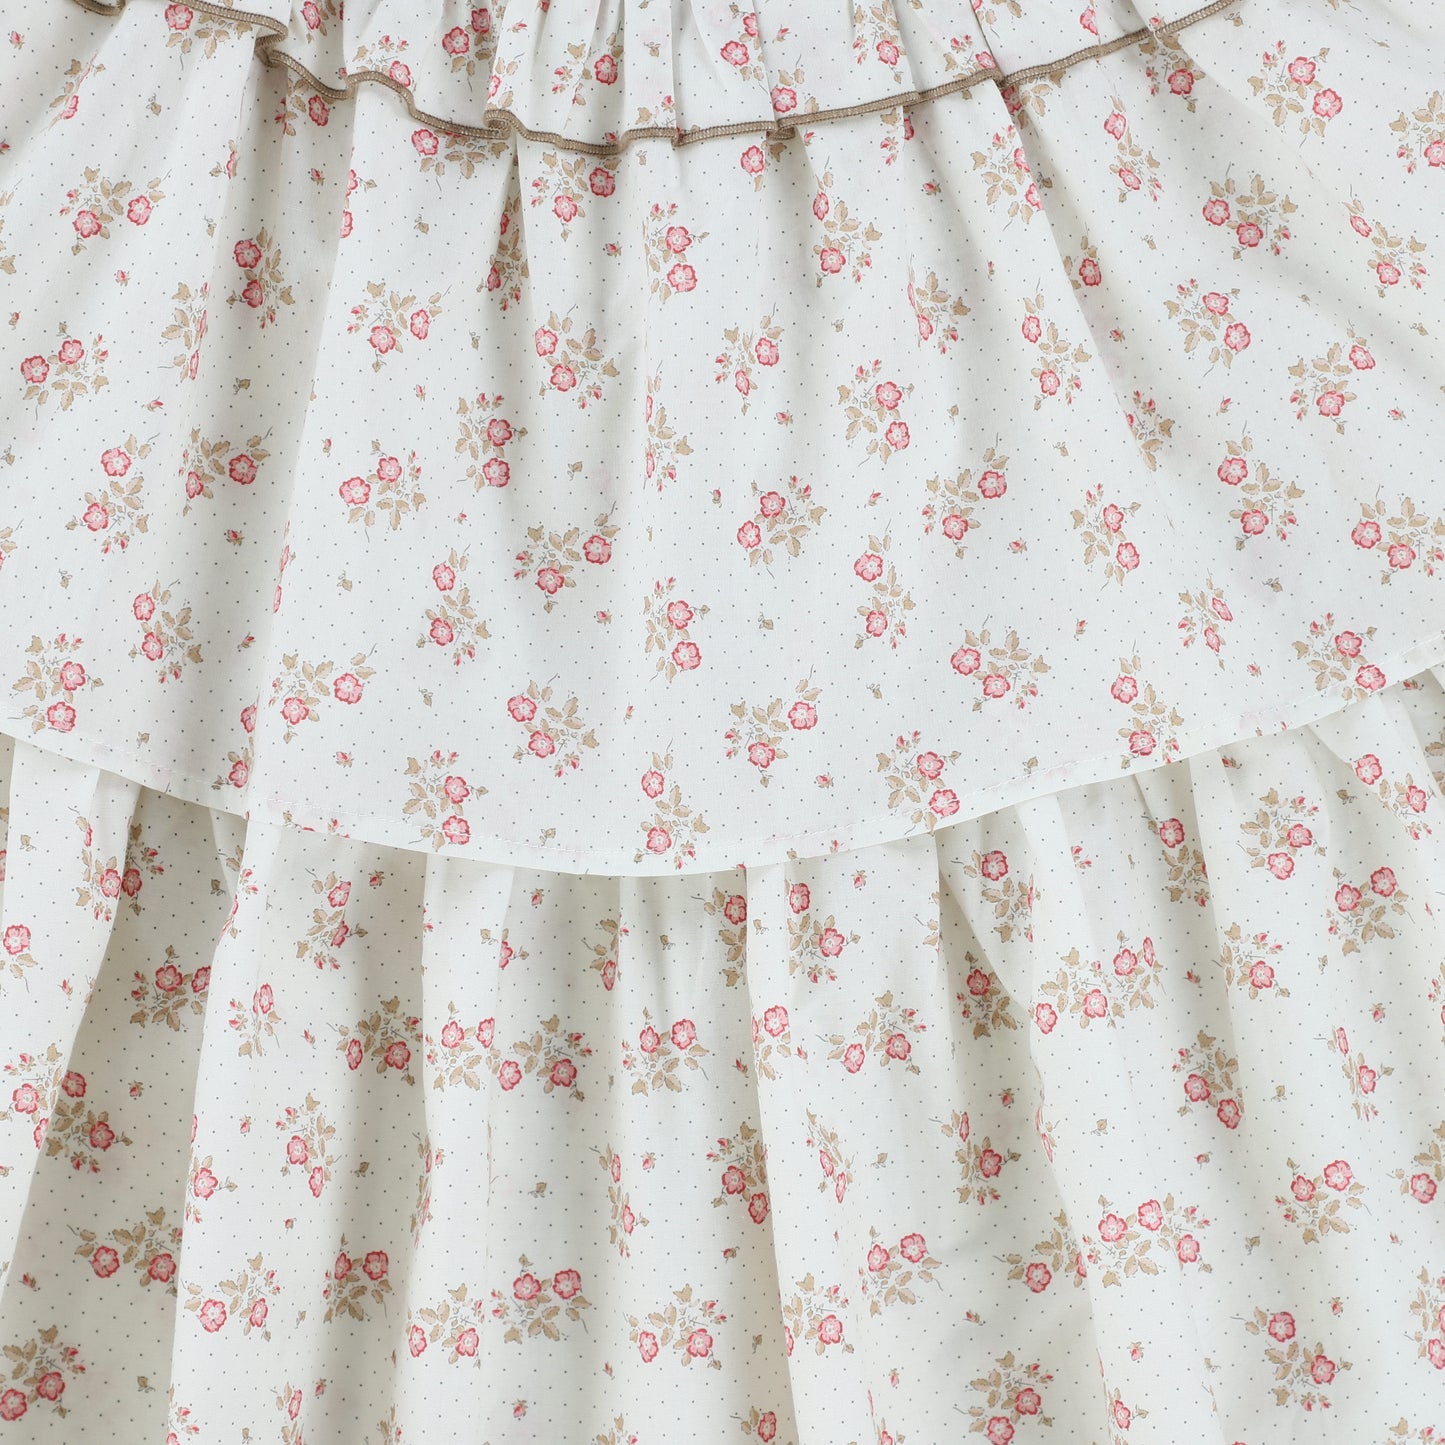 CERA UNA VOLTA WHITE FLORAL ALL OVER SMOCKED LAYERED SKIRT [Final Sale]